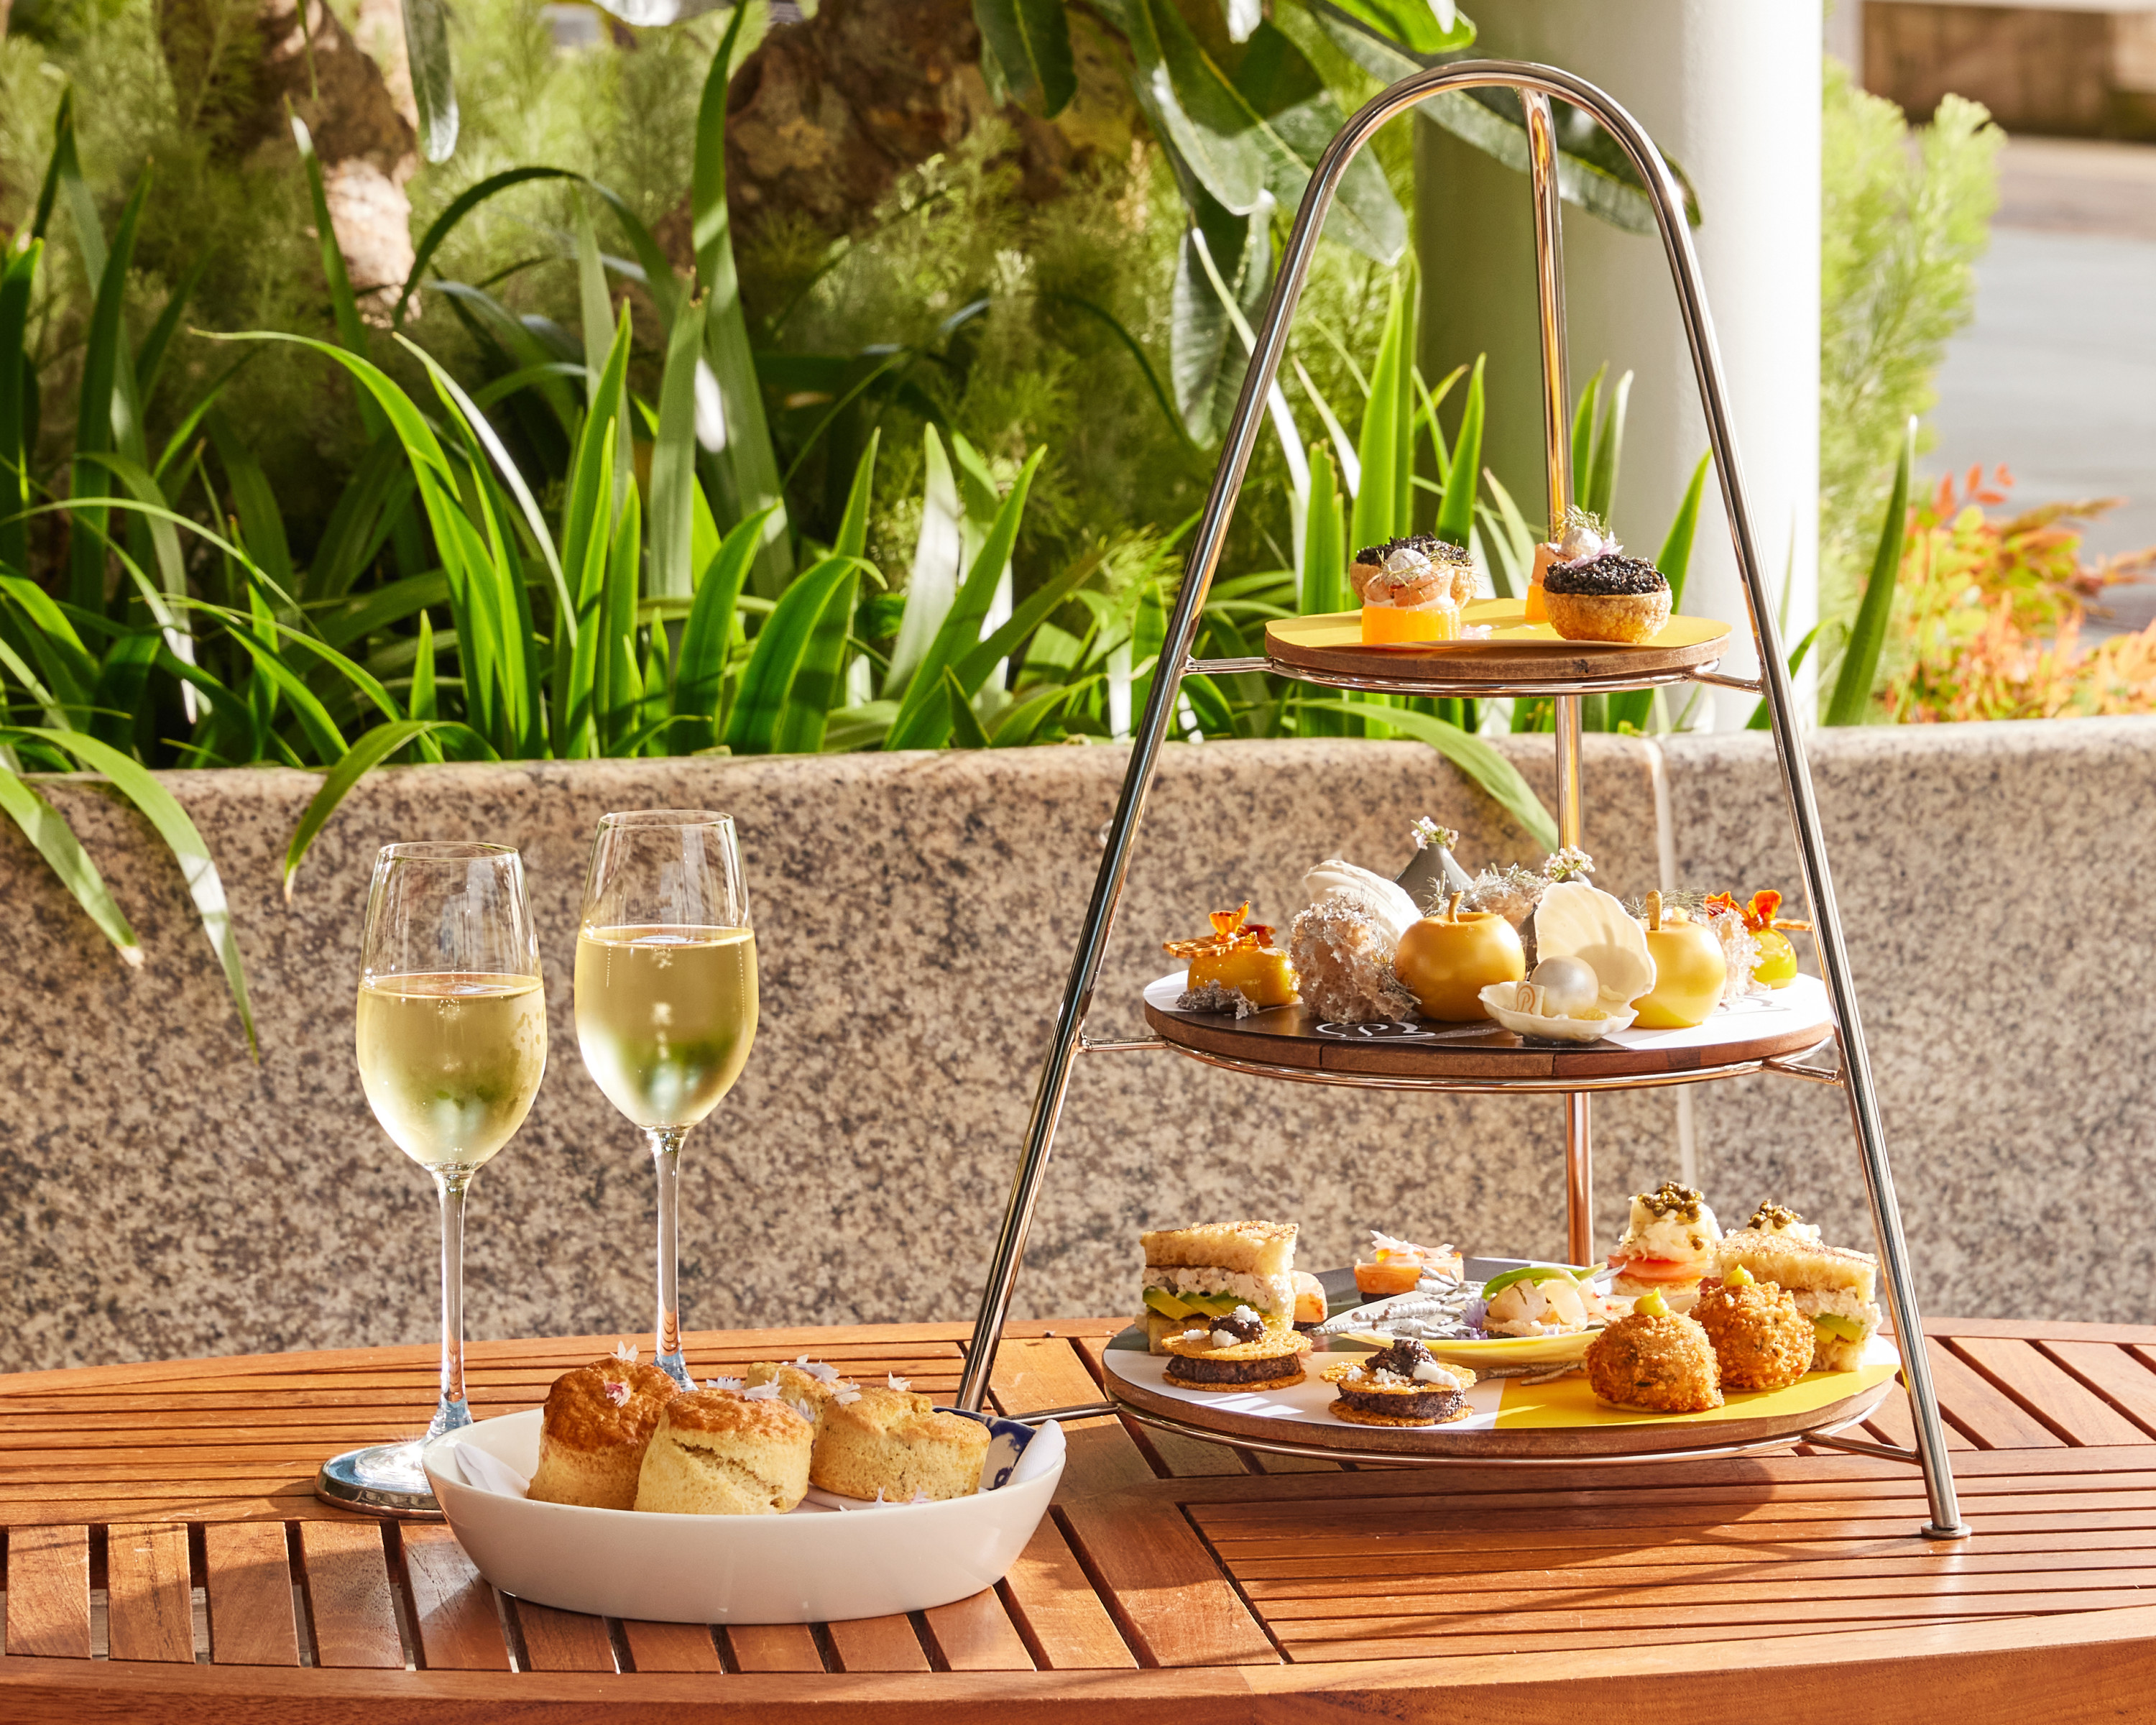 A high tea at Crown Sydney, which is available for Mother's Day lunch